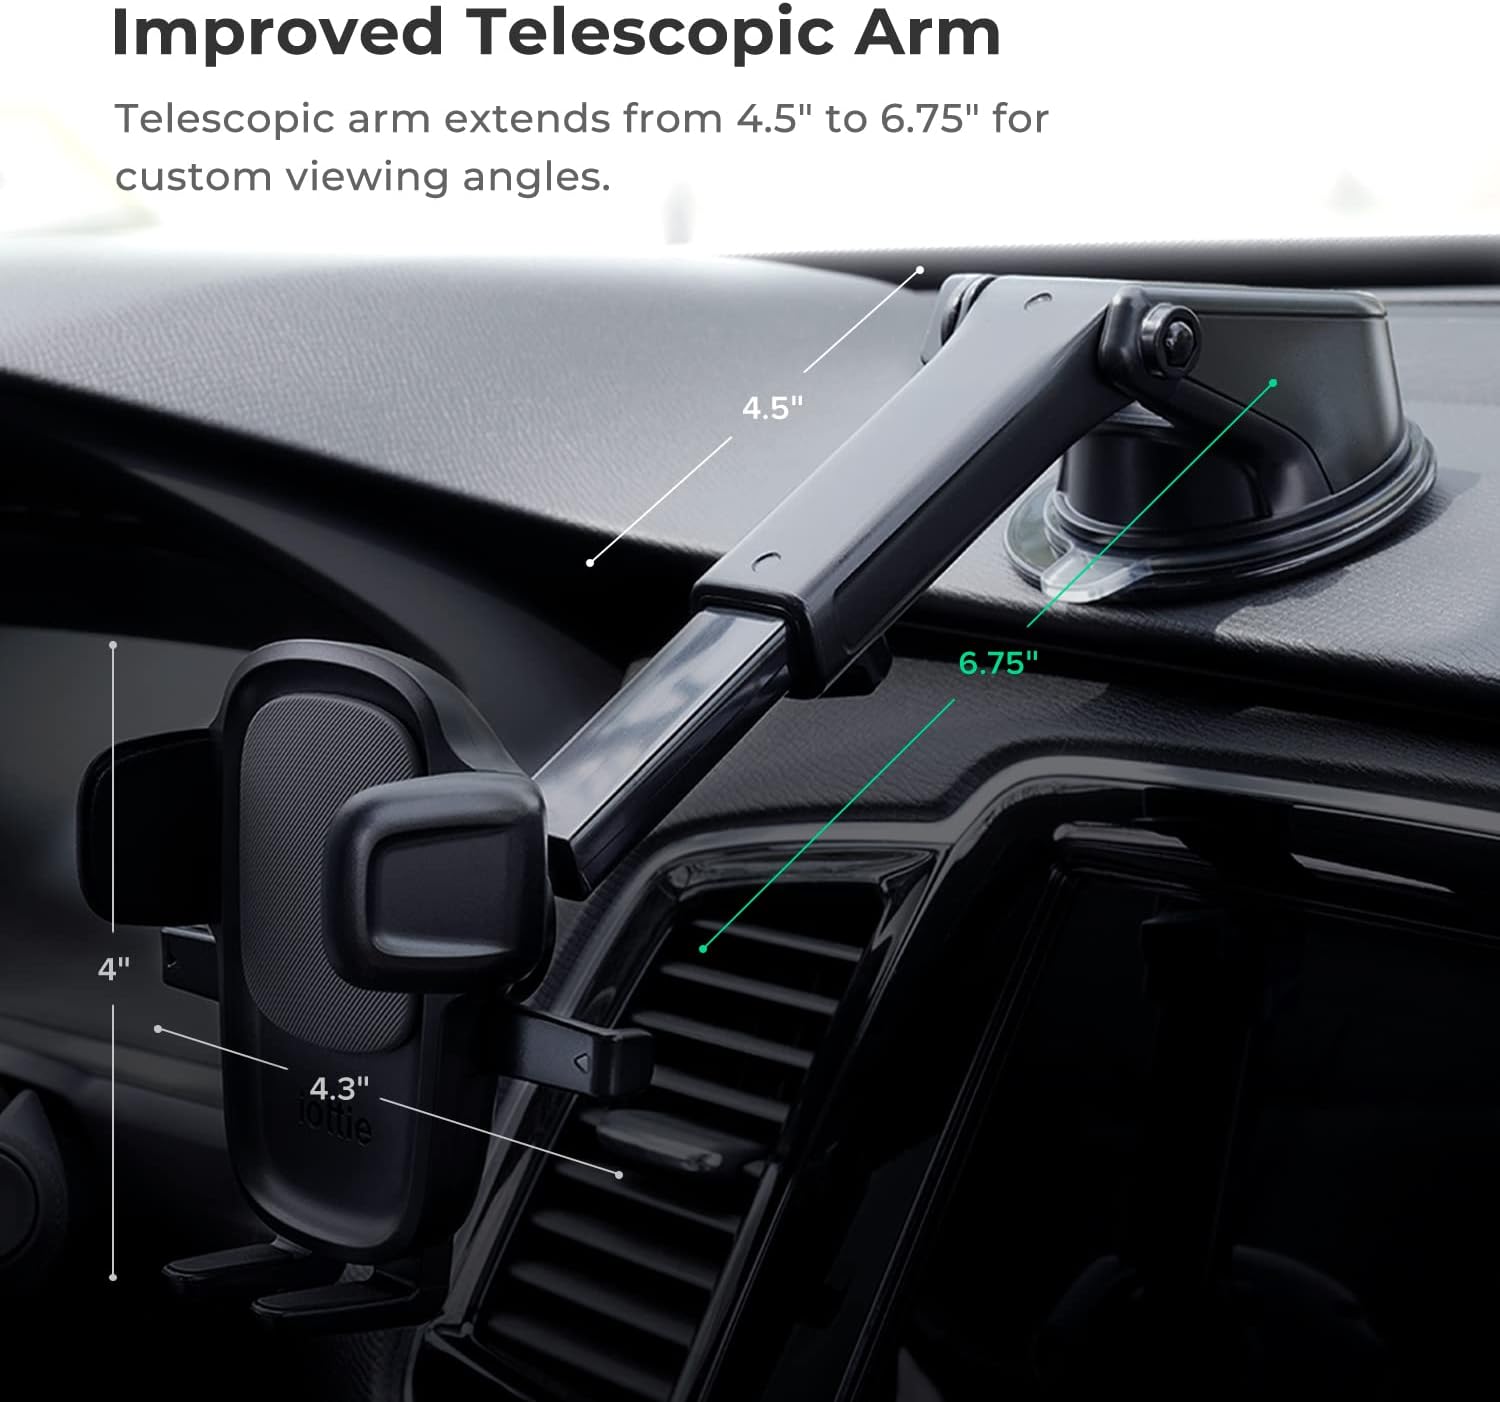 Rating: iOttie Easy One Touch 5 Dashboard & Windshield Universal Car Mount Phone Holder Desk Stand